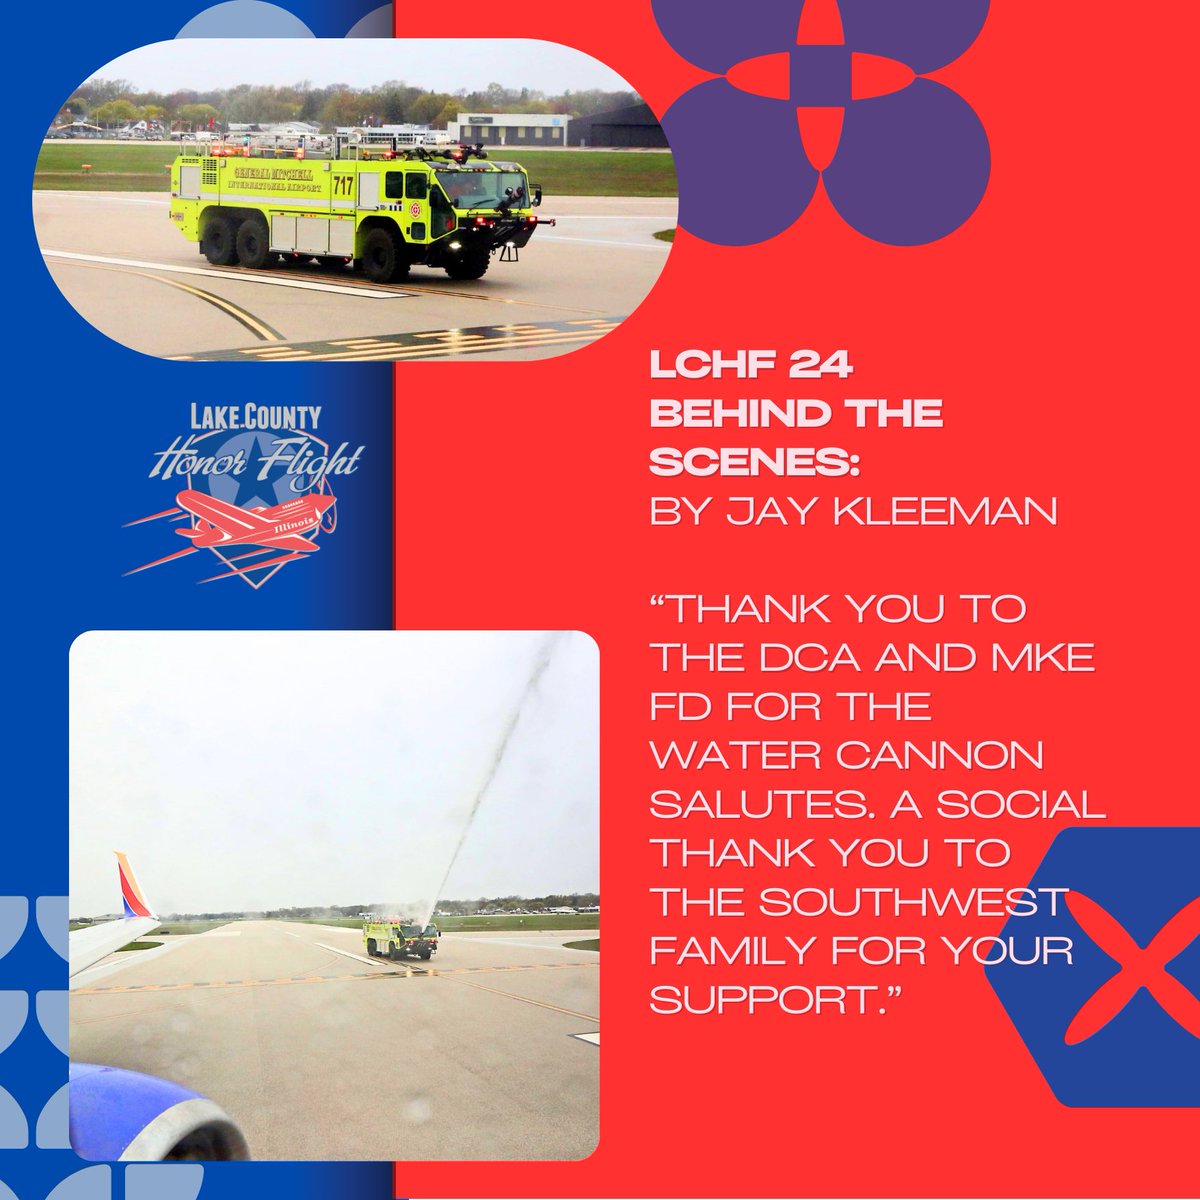 LCHF 24 - Behind the Scenes: By Jay Kleeman

“Thank you to the DCA and MKE FD for the water cannon salutes. A social thank you to the Southwest family for your support.”
#lcfh24 #honorflight #LakeCountyHonorFlight